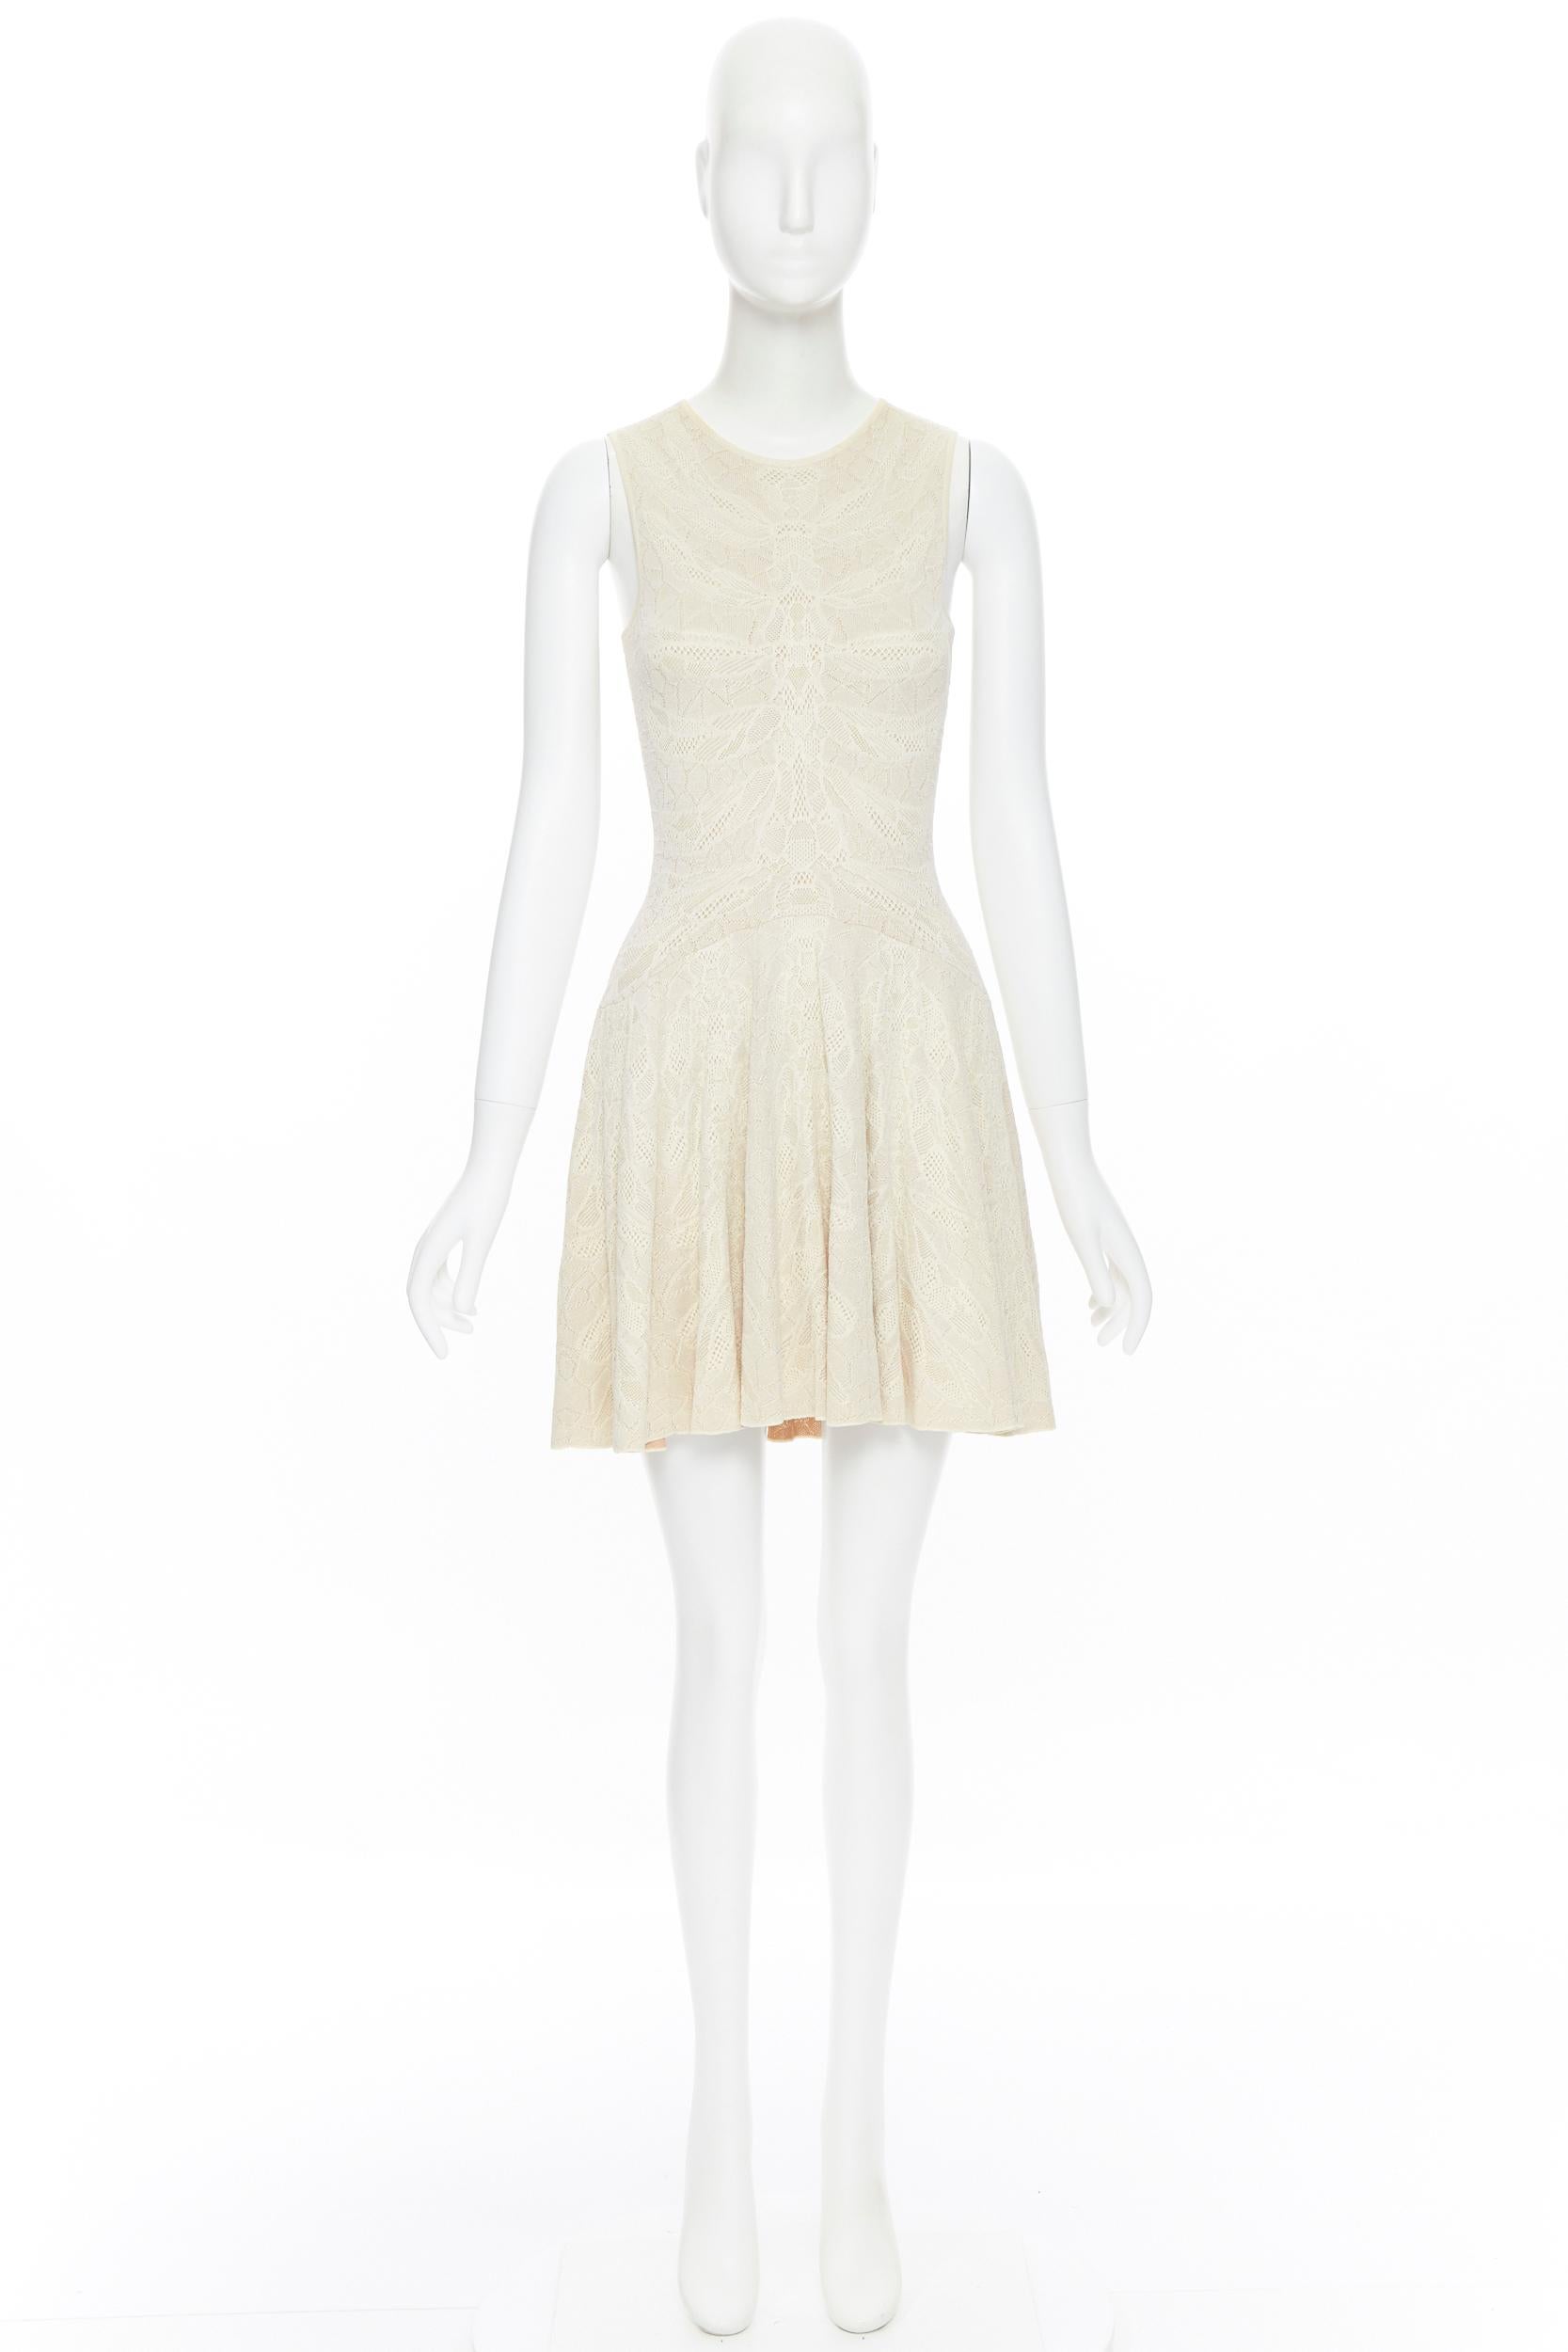 ALEXANDER MCQUEEN silk viscose jacquard knit fit flare cocktail dress S
Brand: Alexander Mcqueen
Model Name / Style: Fit flare dress
Material: Silk, viscose
Color: White
Pattern: Abstract
Closure: Slip on
Extra Detail:
Made in: Italy

CONDITION: